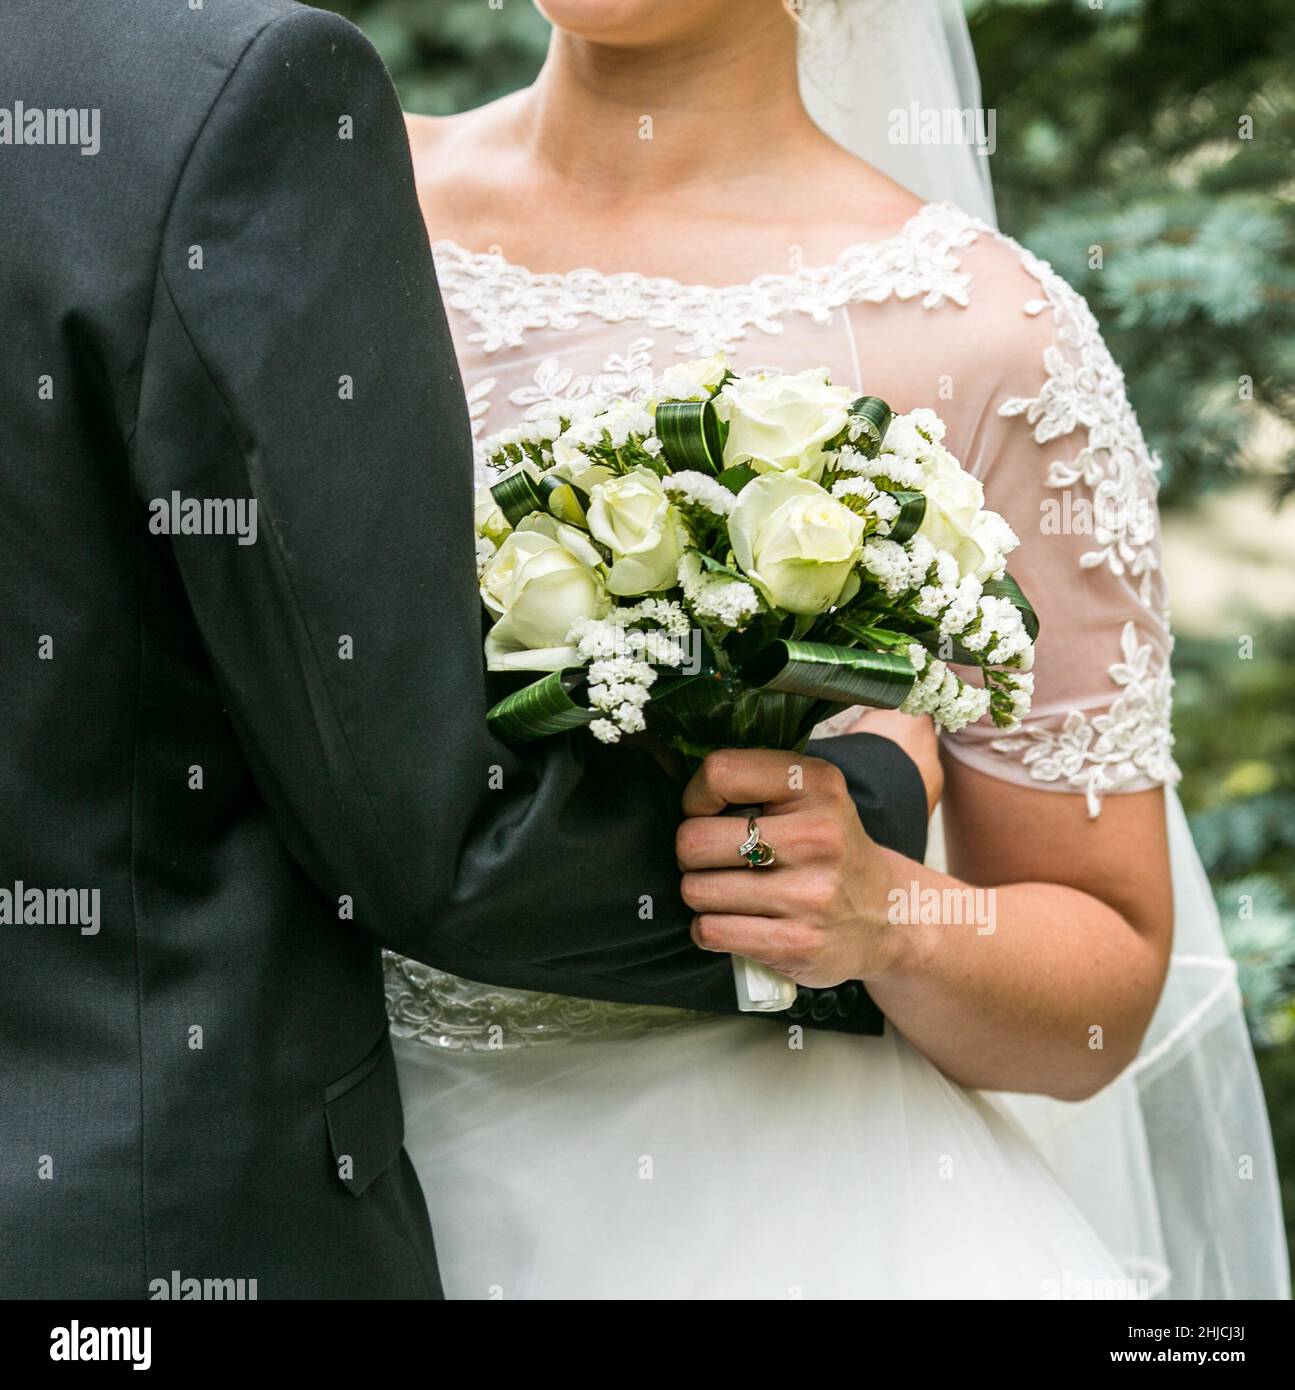 The bride and groom stand side by side and hold a wedding bouquet. Husband and wife hold flowers on their wedding day. Stock Photo